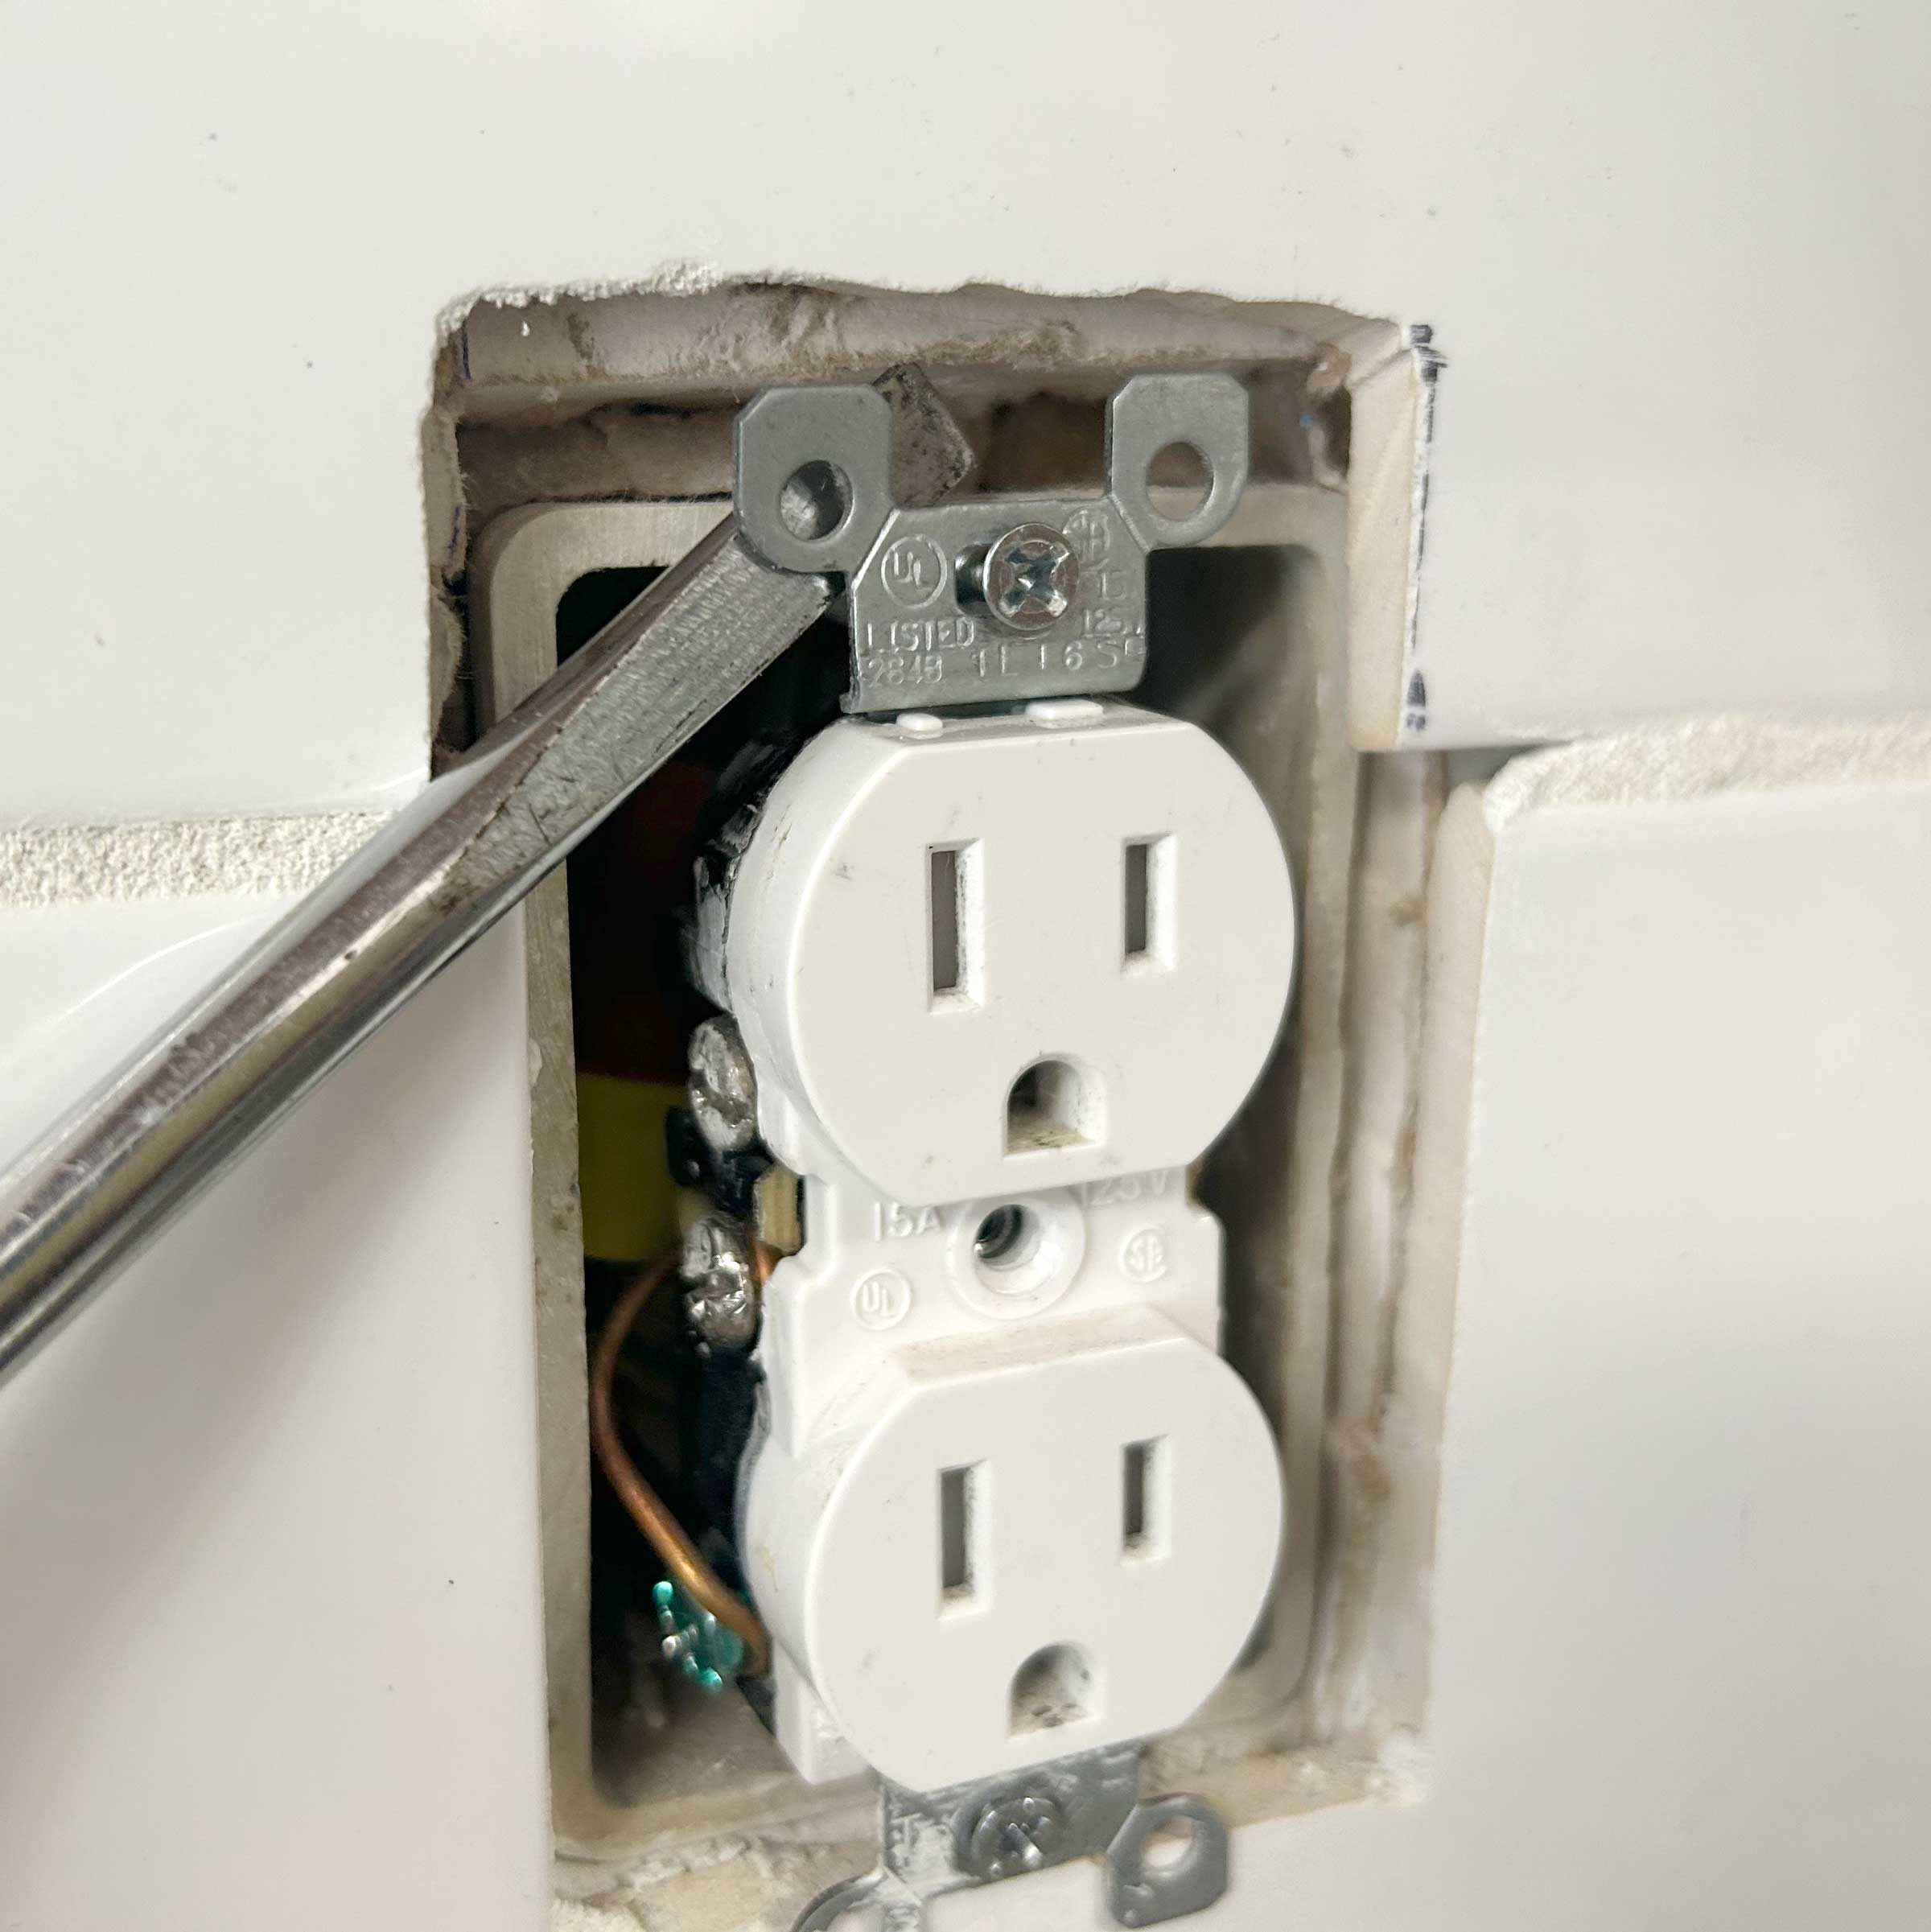 What are you using to get outlet power boxes to permanently stick